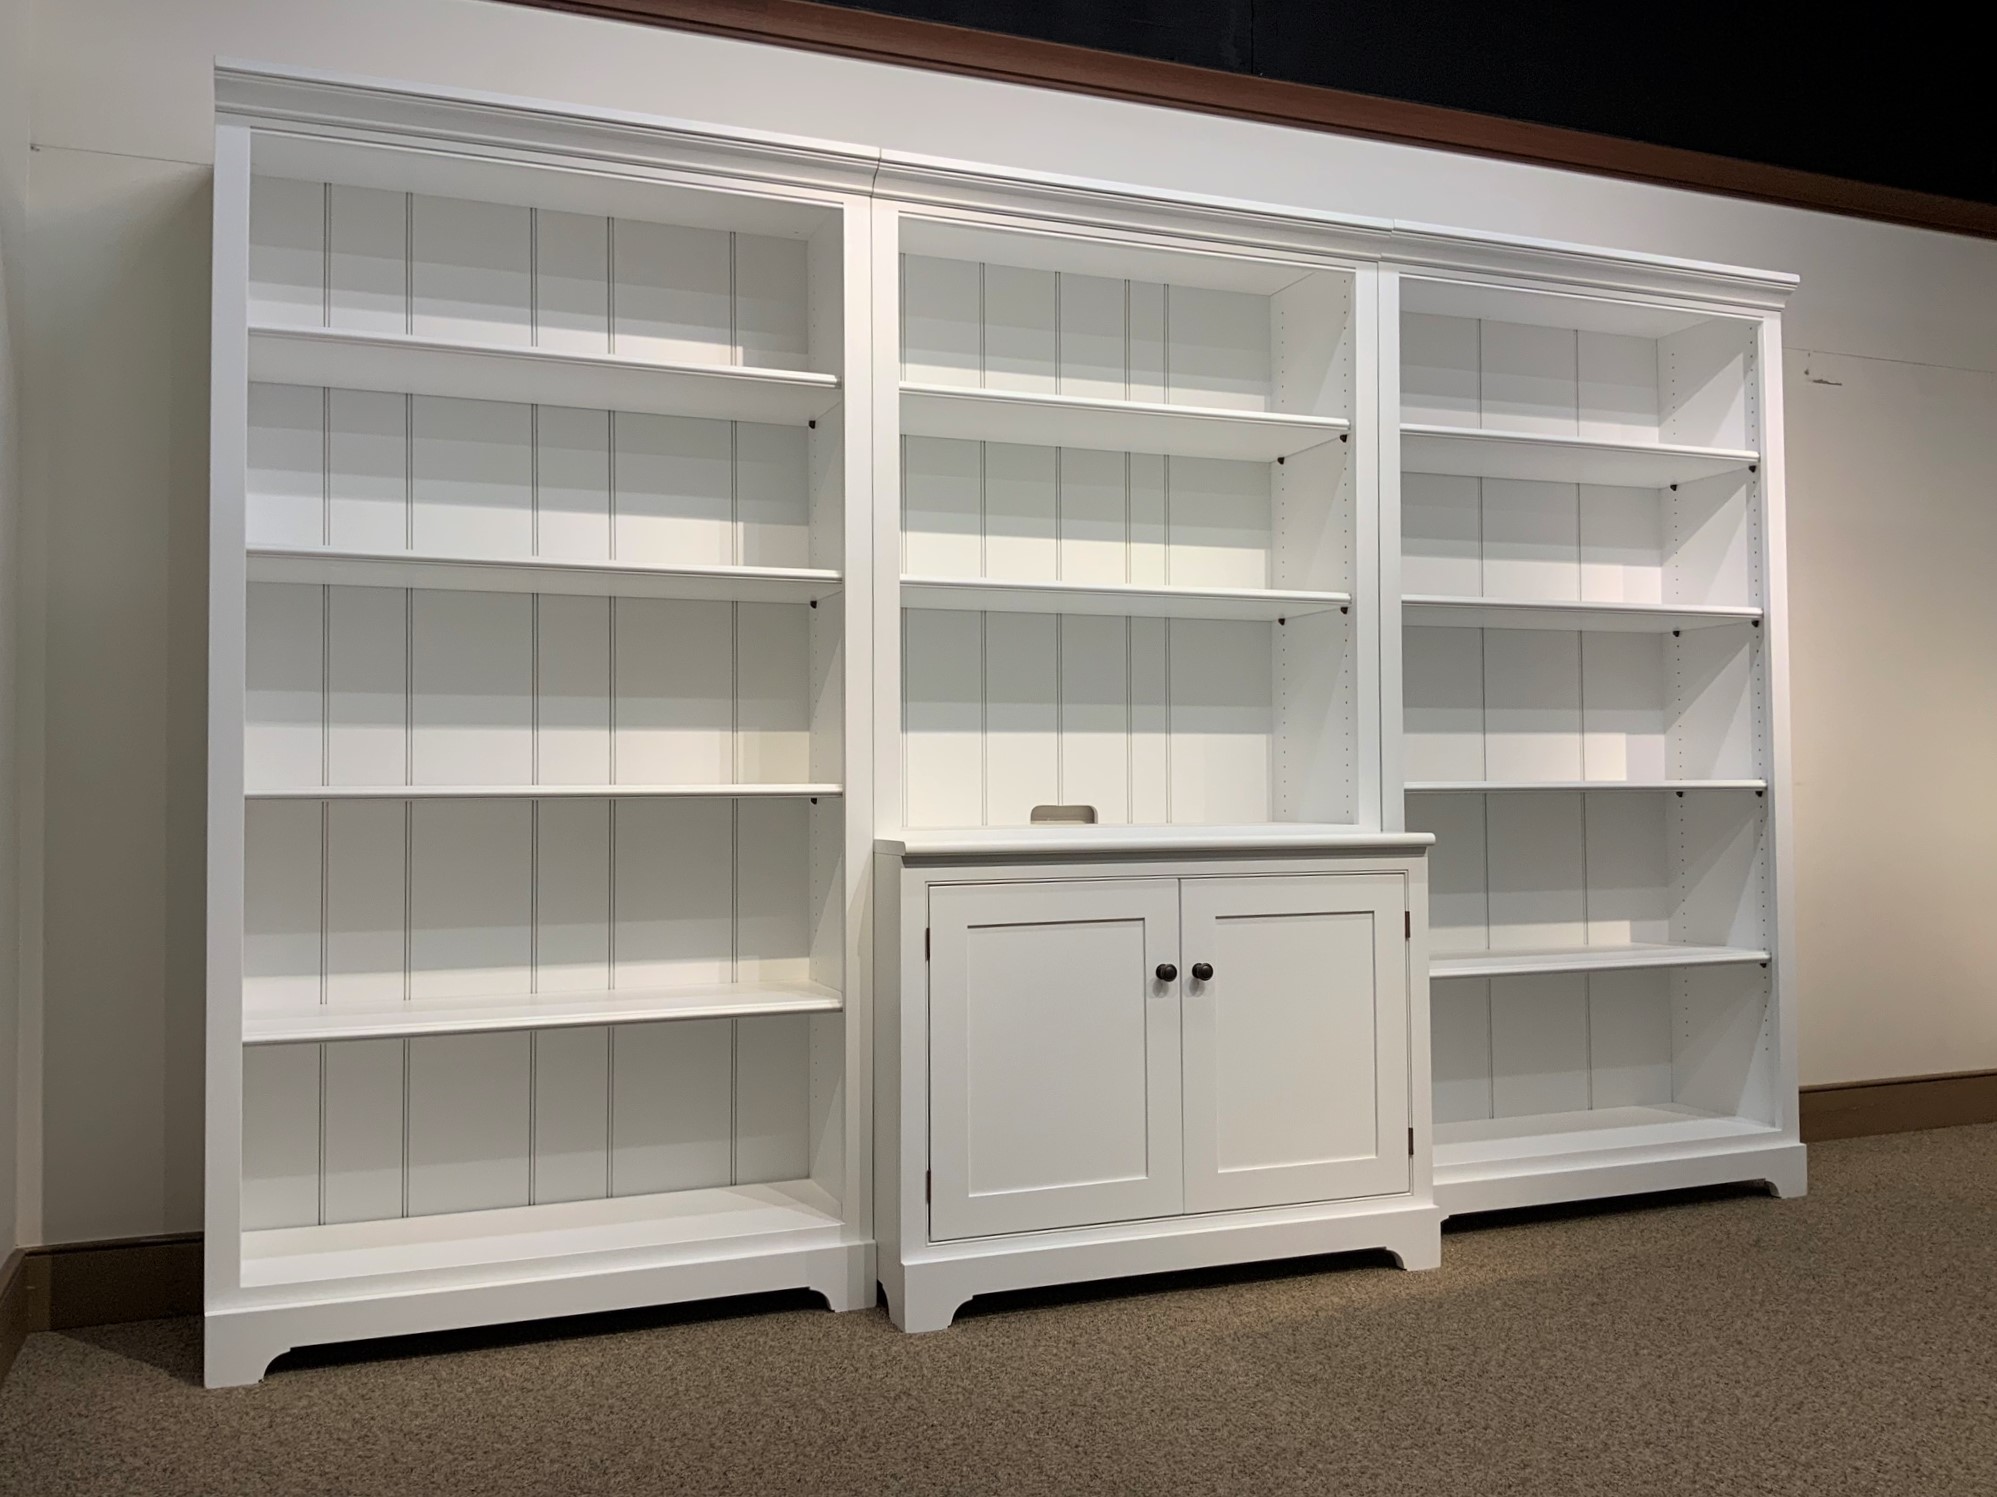 Shaker Bookcases Home Library, 8 Ft Tall Bookcase